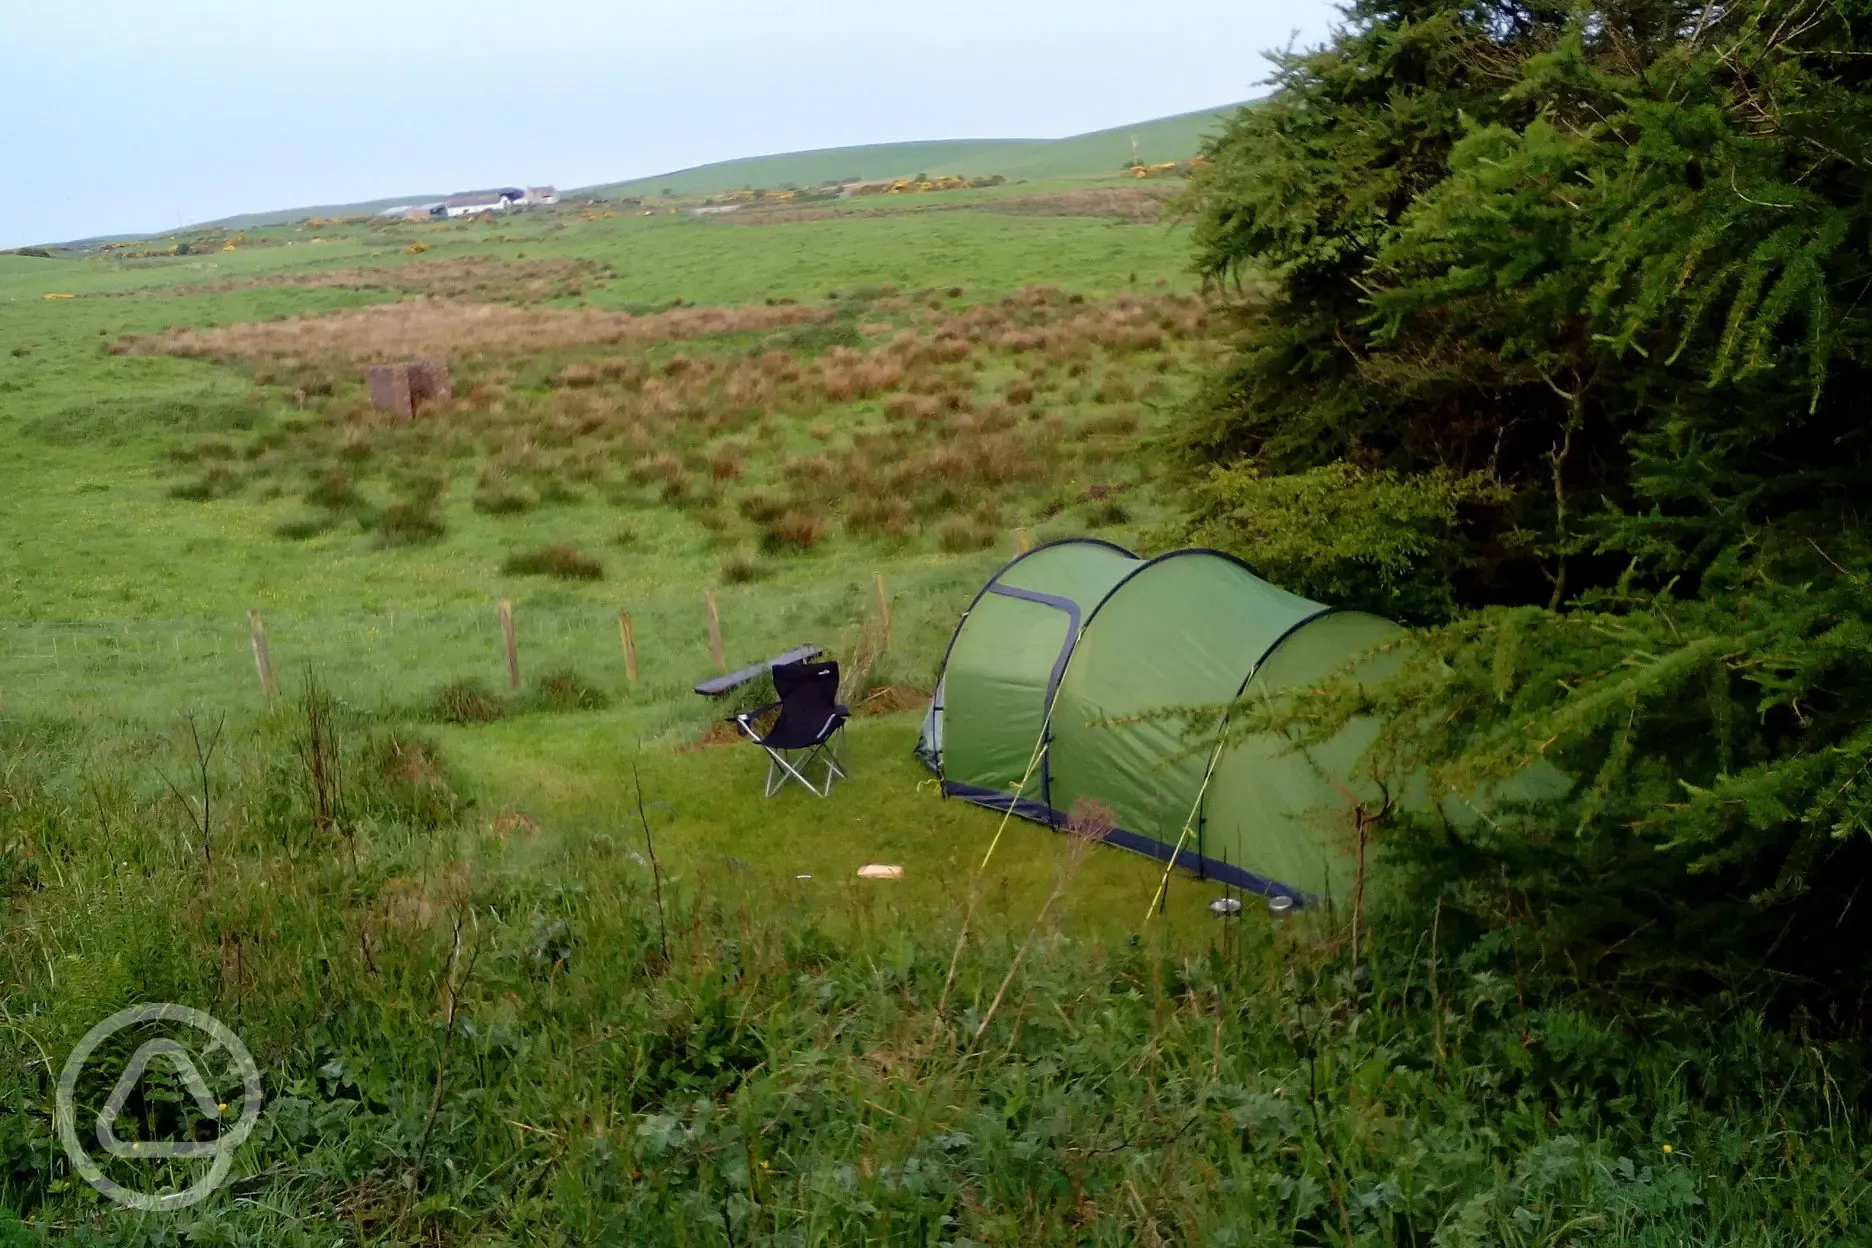 Secluded pitch for small tent also has privacy